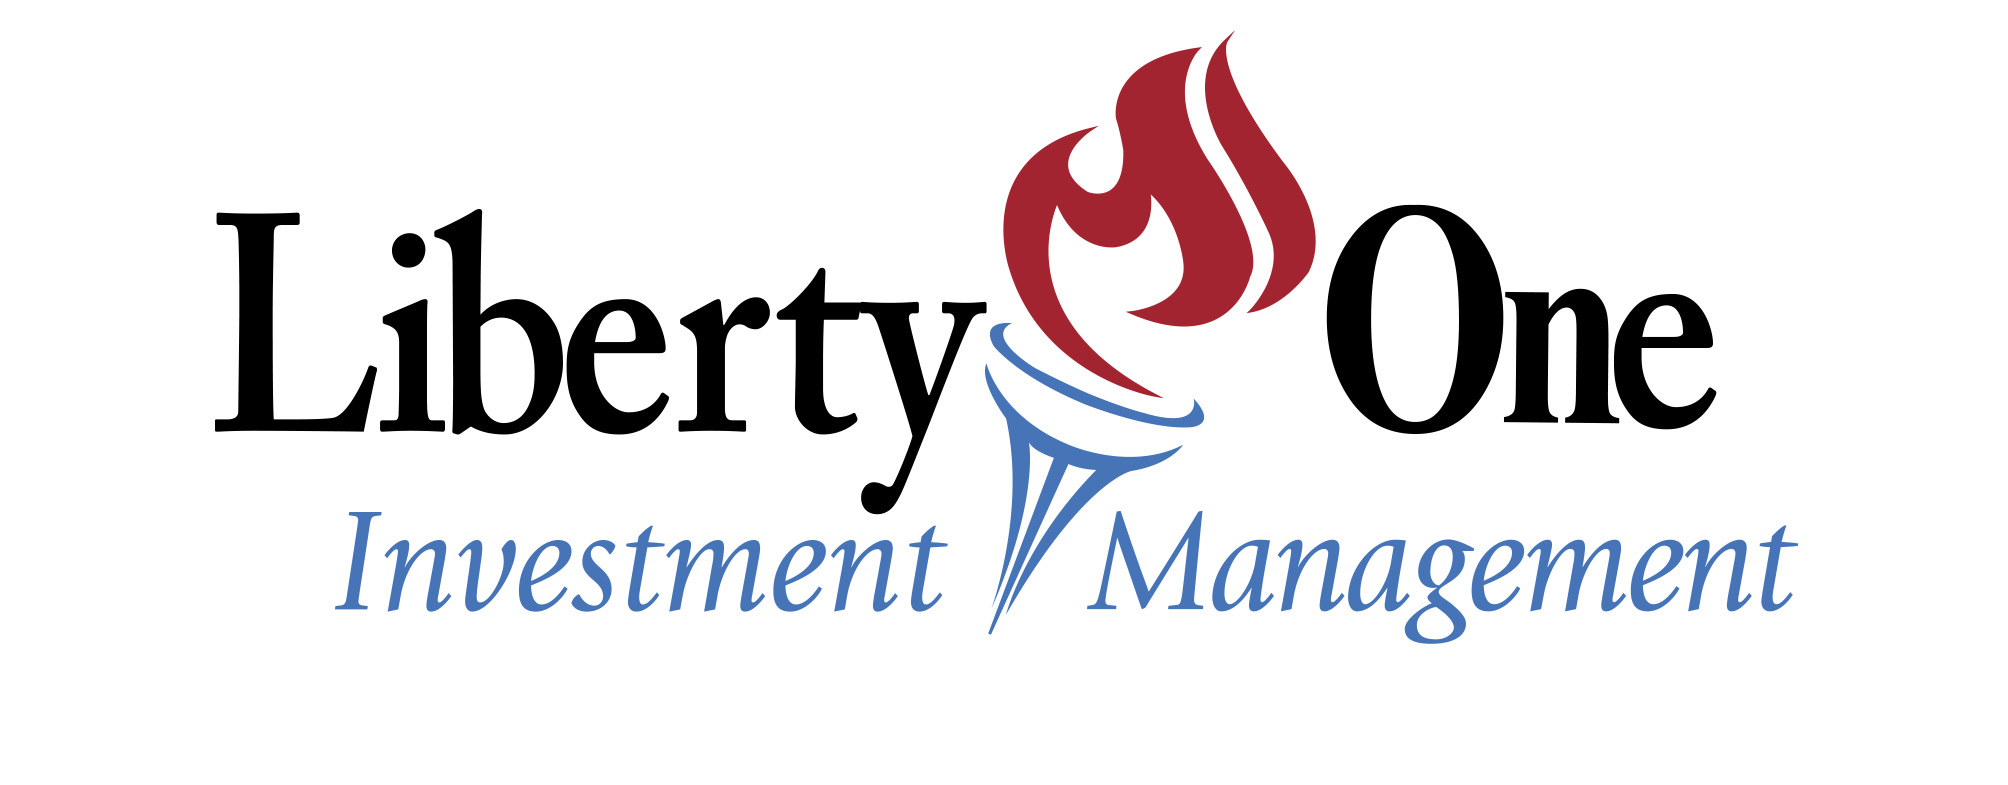 Liberty One Investment Management Logo